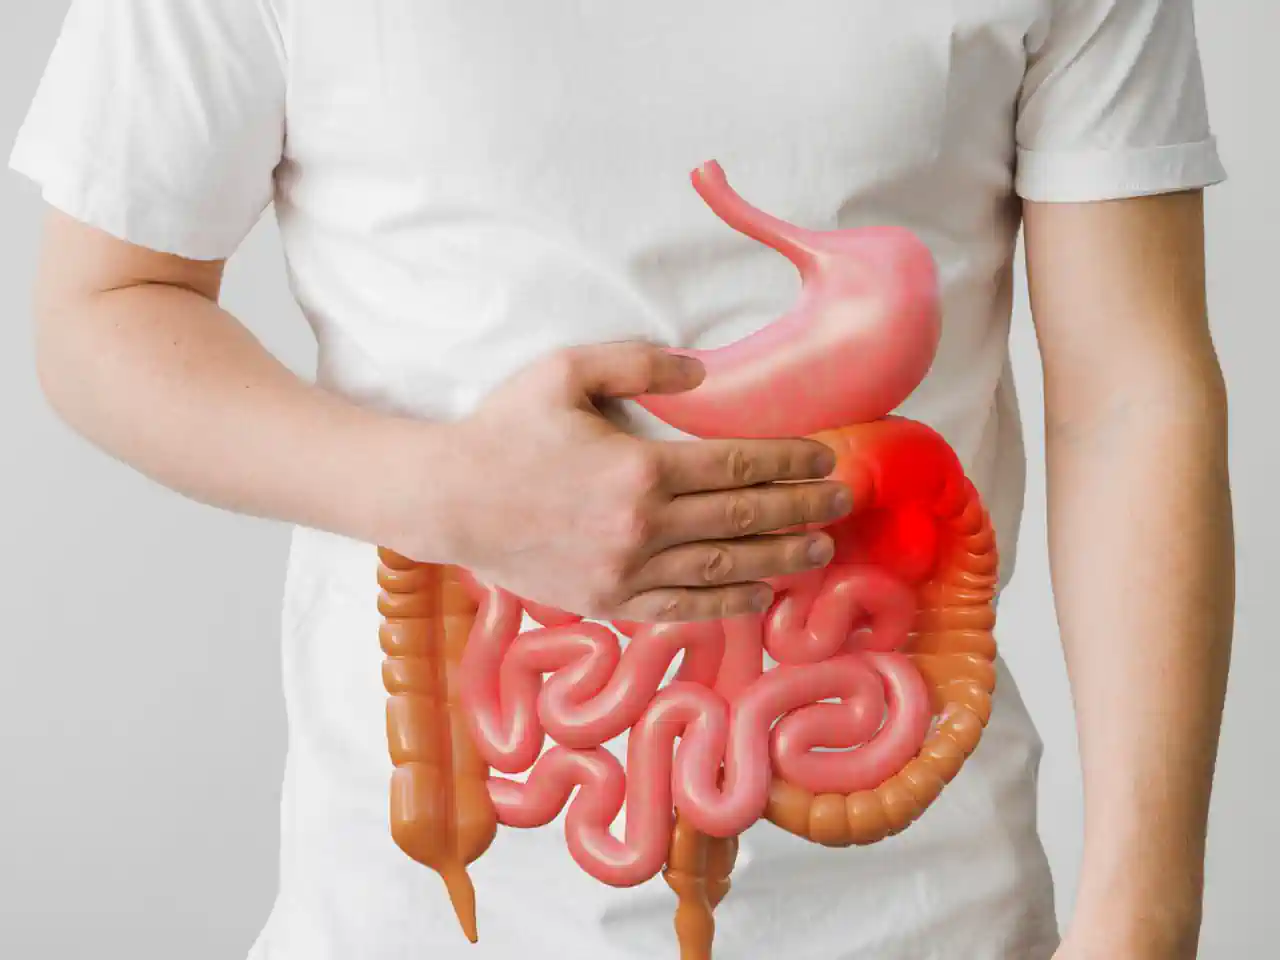 Stomach Disorders and How to Avoid Them